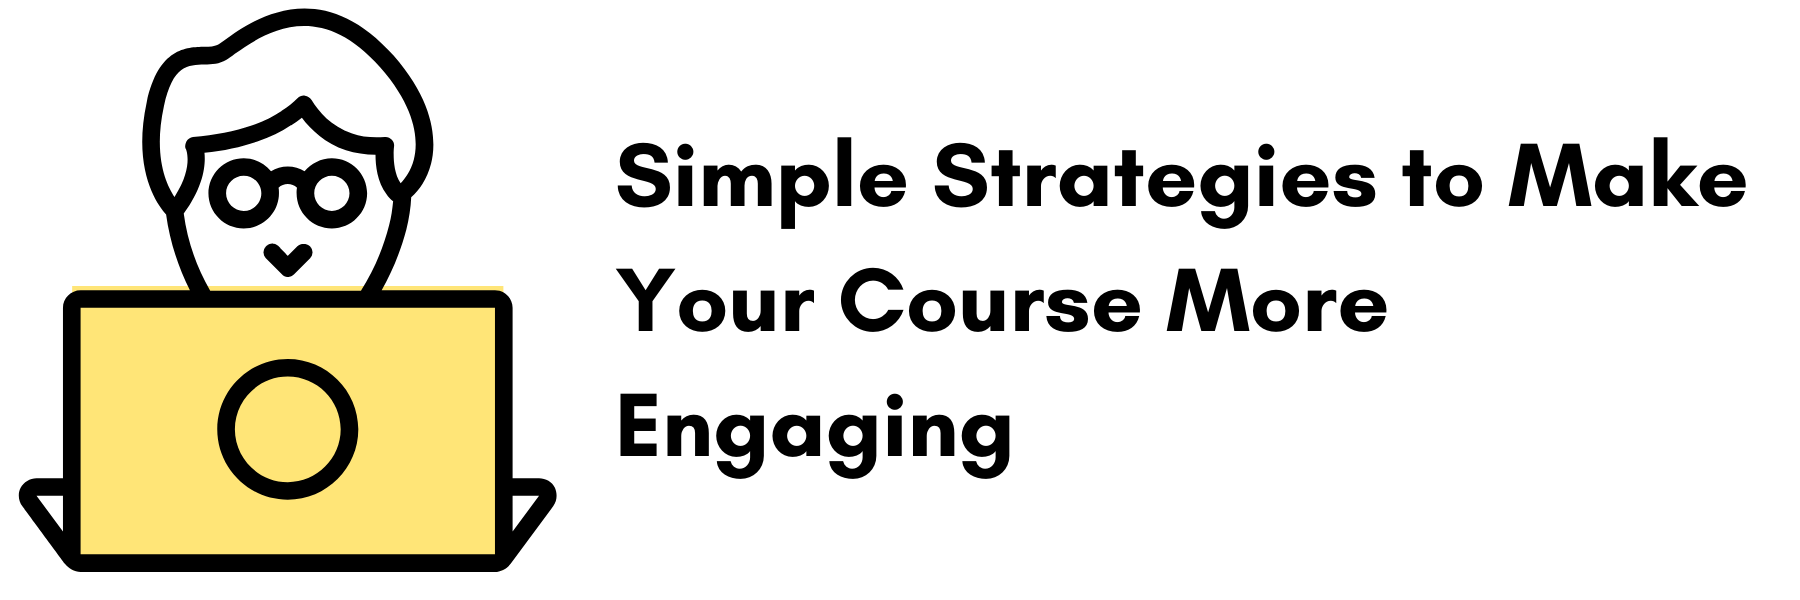 Simple Strategies to Make Your Course More Engaging